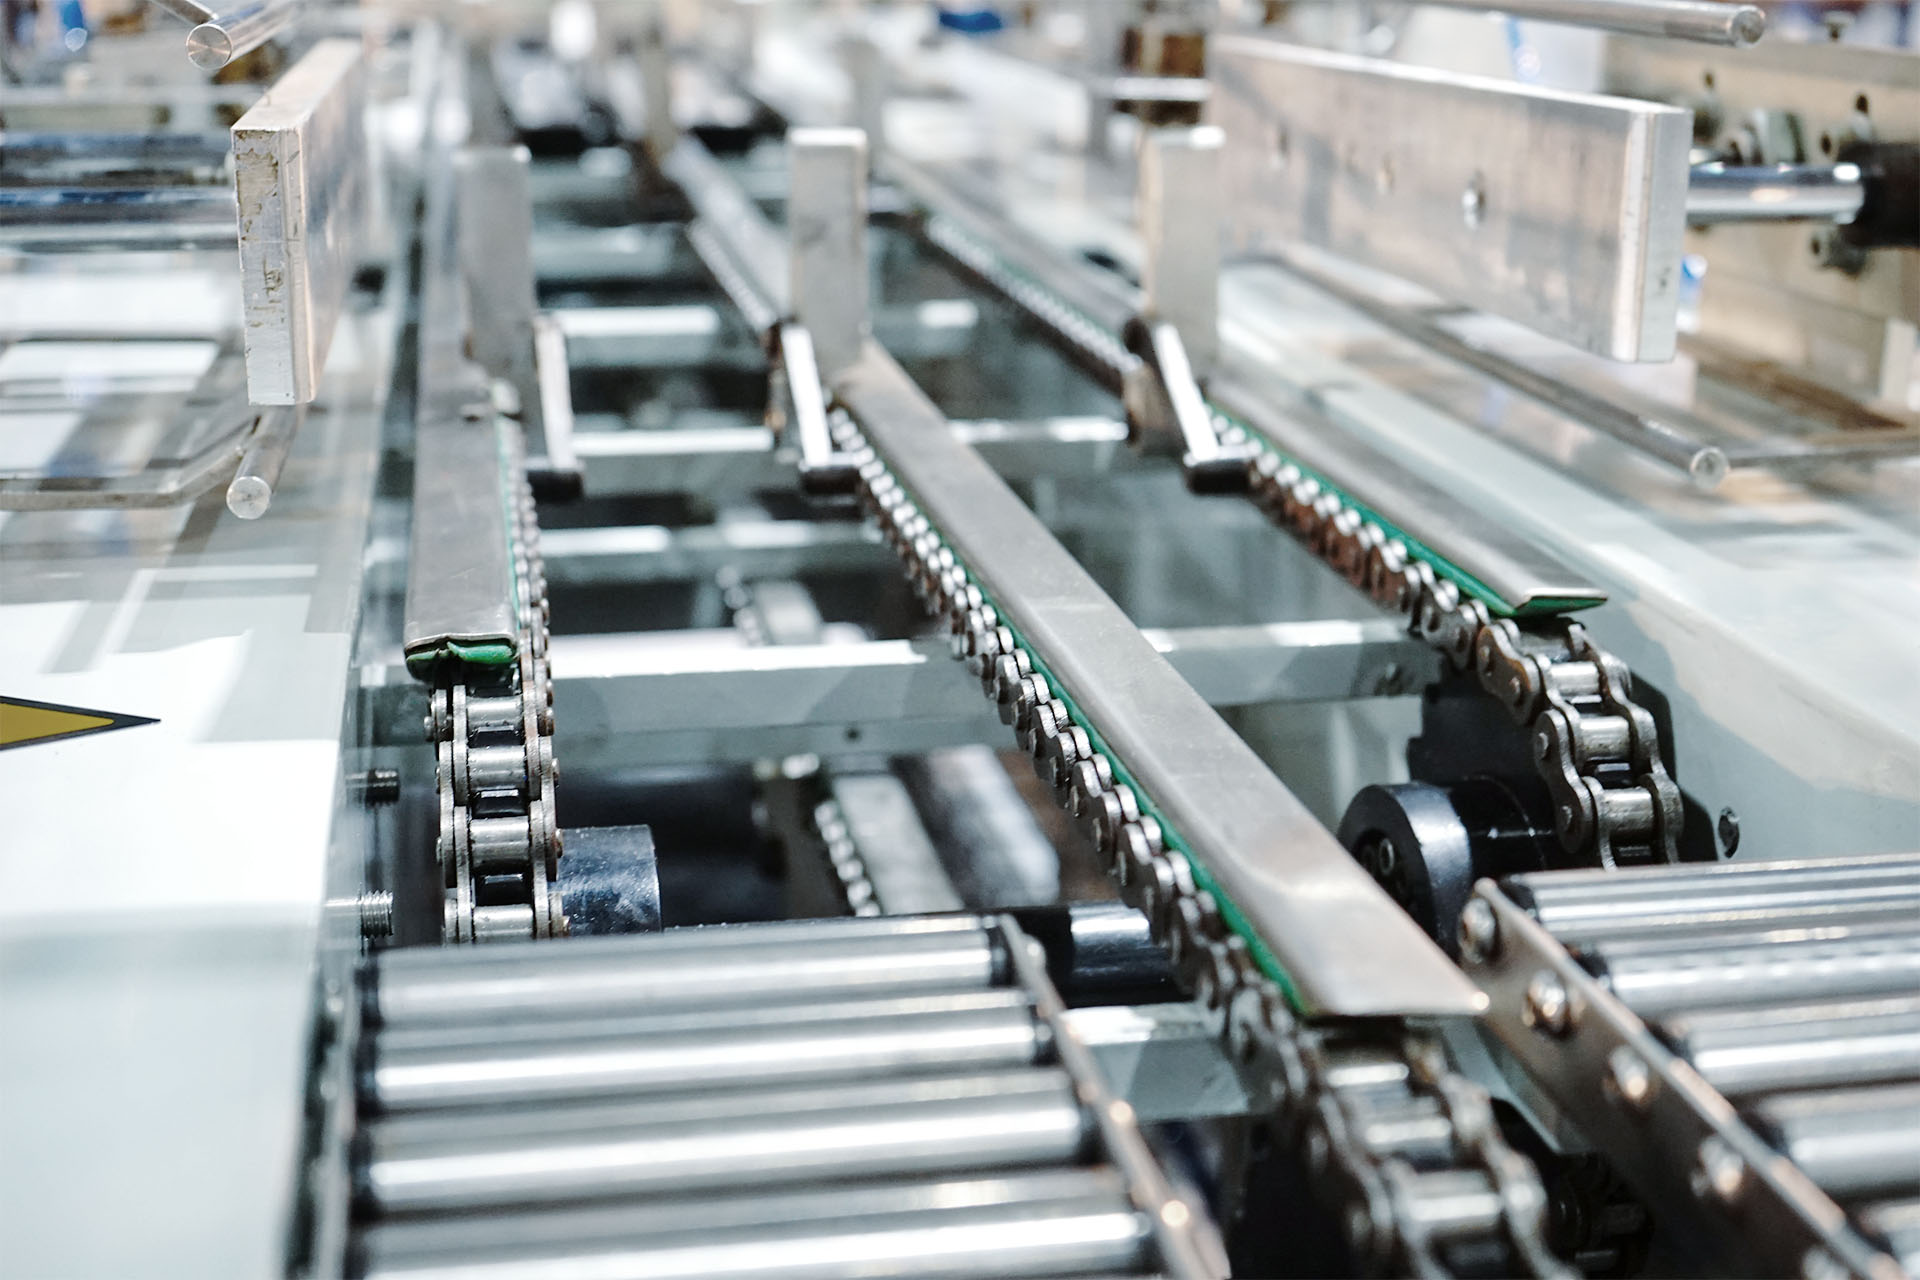 Close up of chains in a conveyor belt